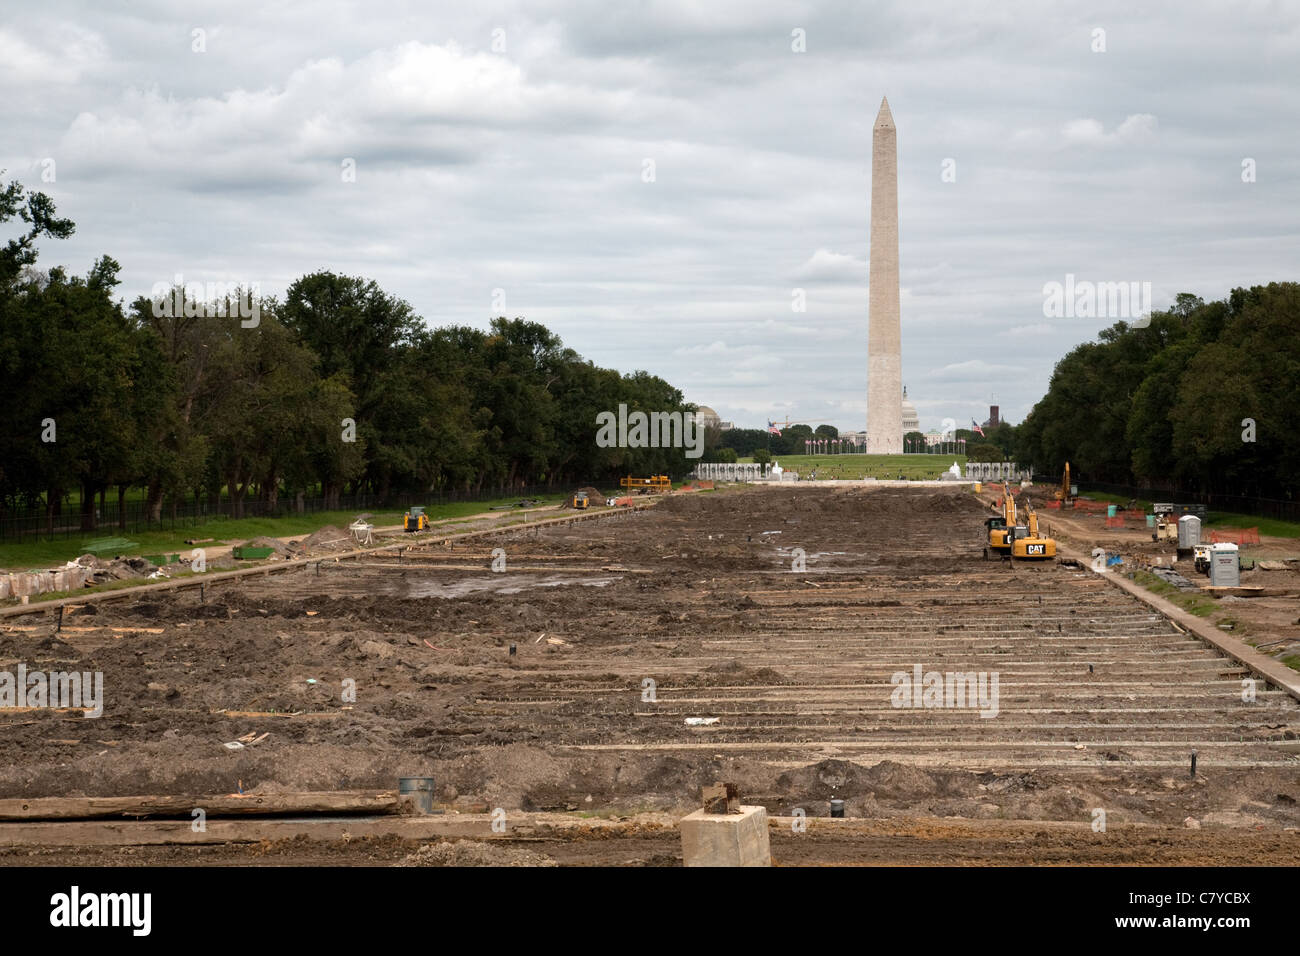 View of the National Mall, Washington DC looking towards the Monument, and restoration of the reflecting pools Stock Photo